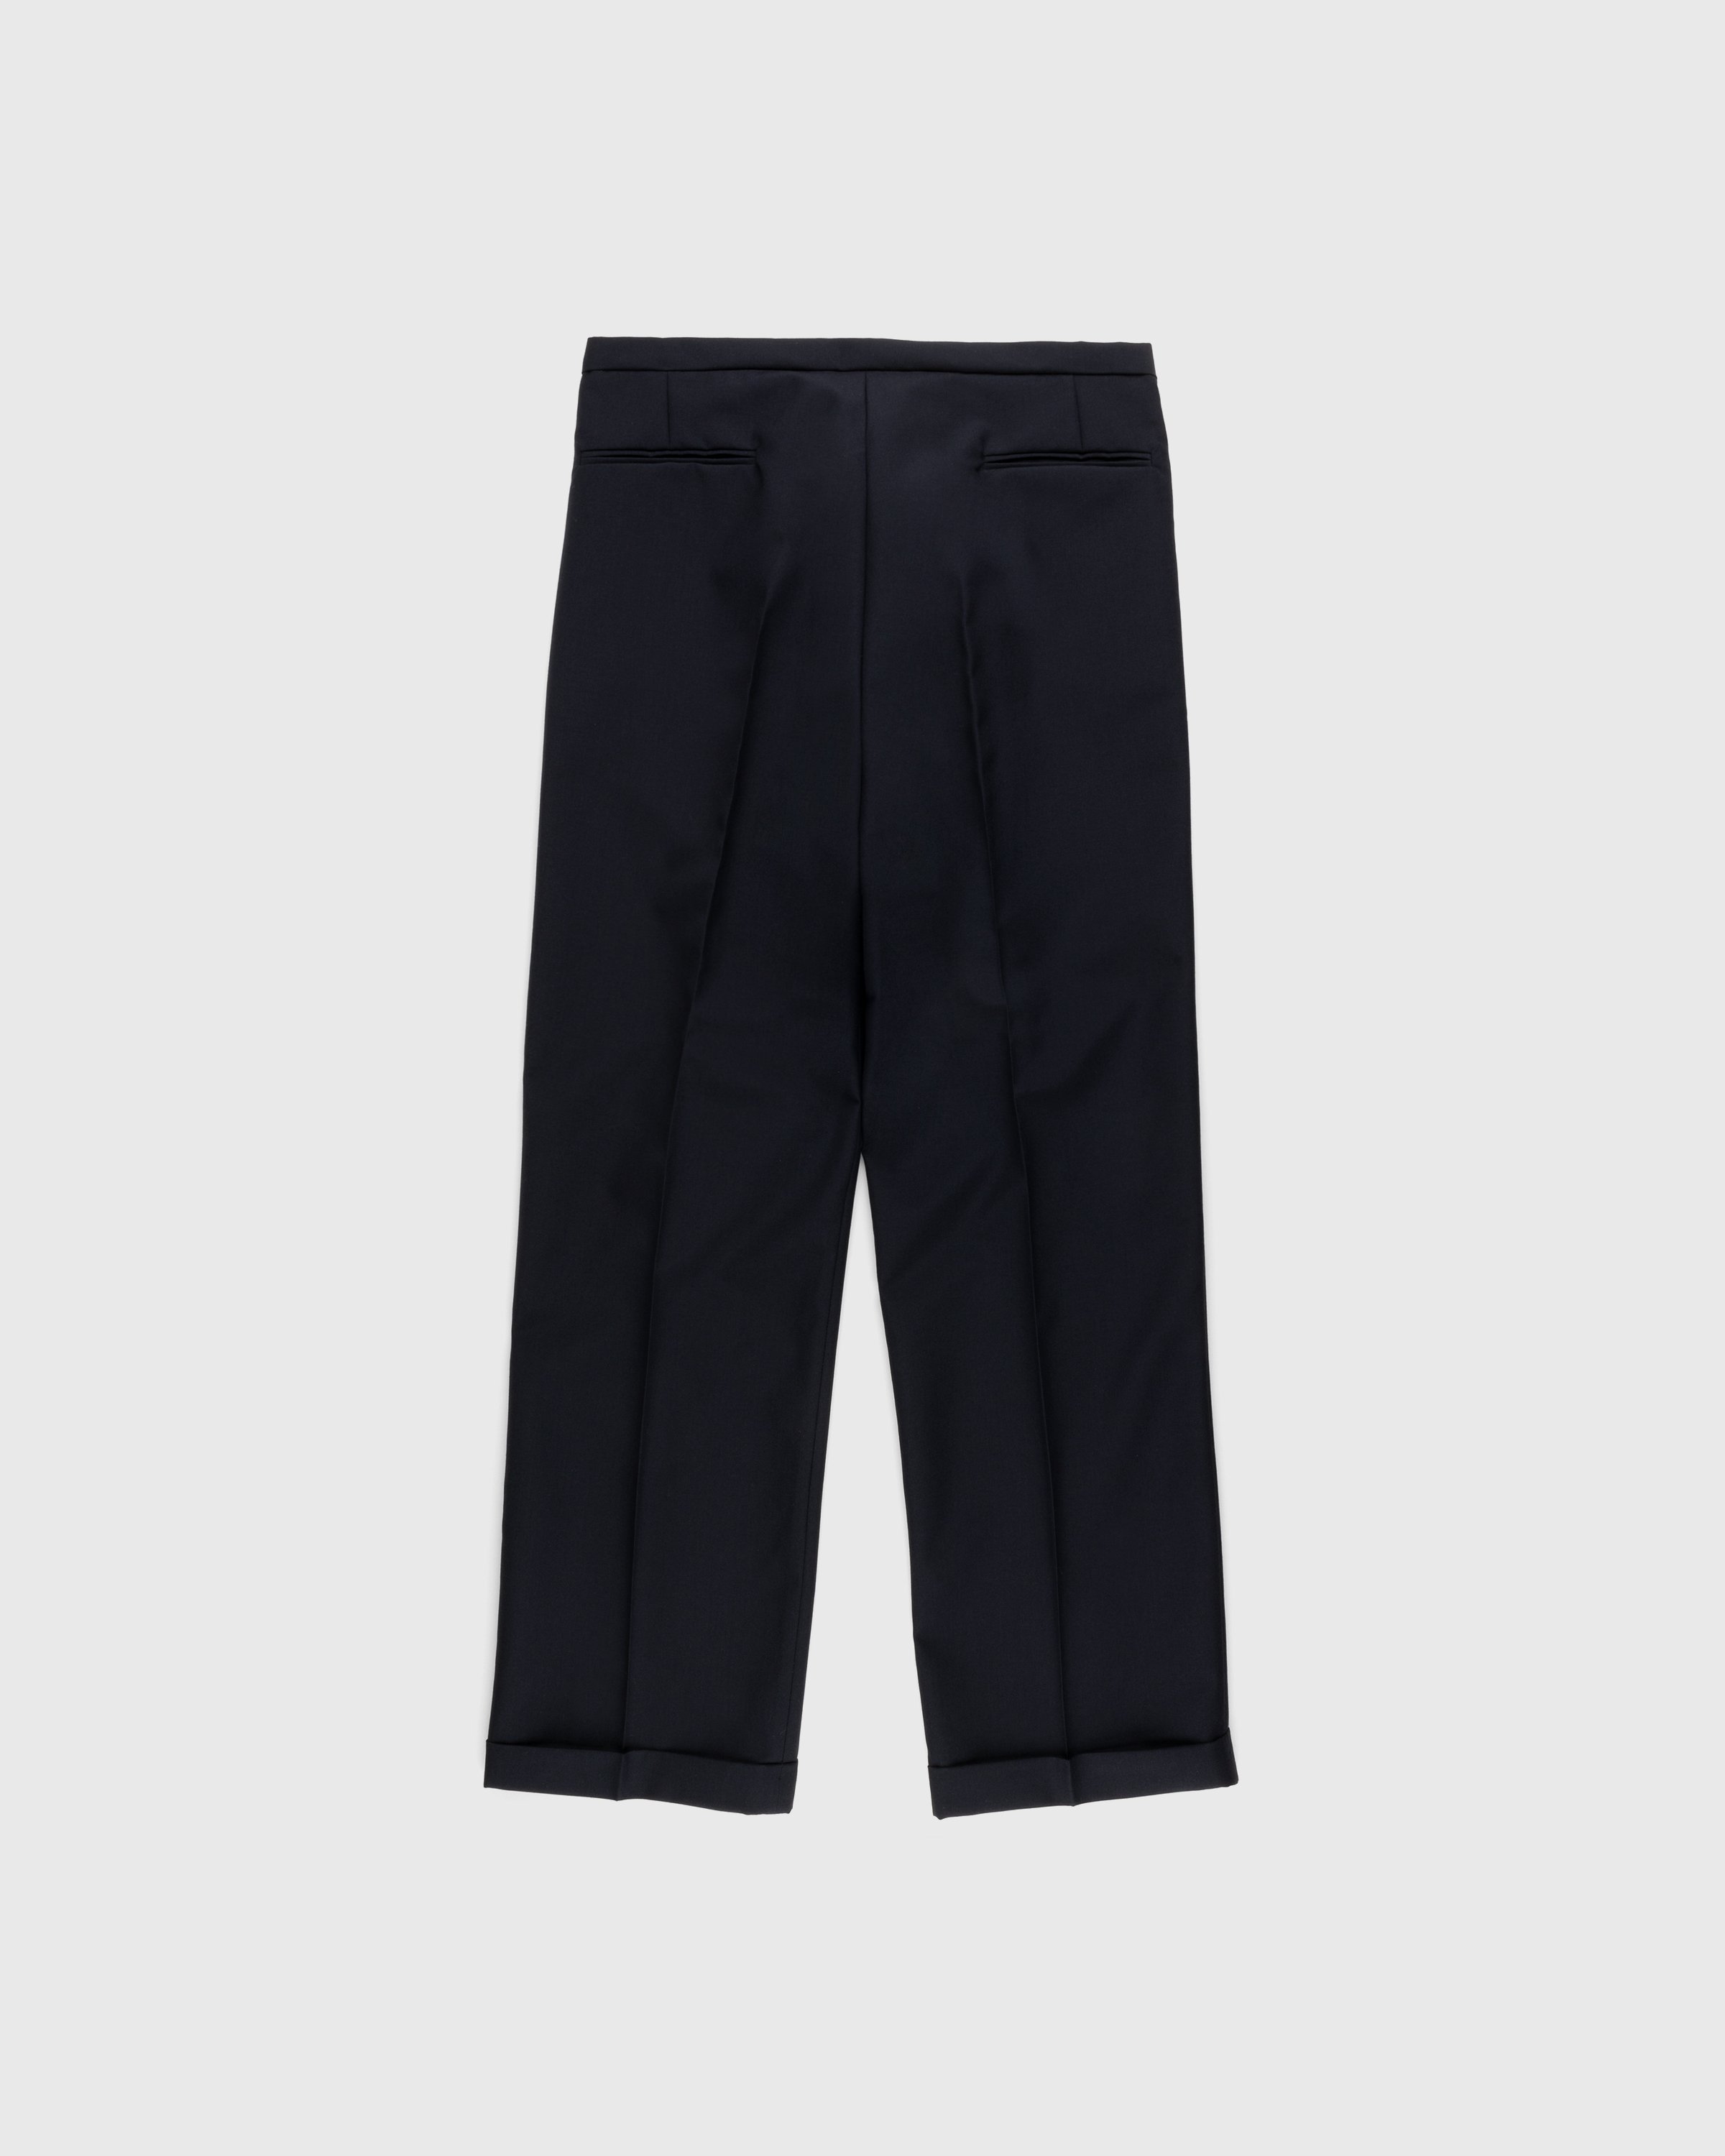 Winnie New York - Pleated Wool Trousers Navy - Clothing - Blue - Image 2